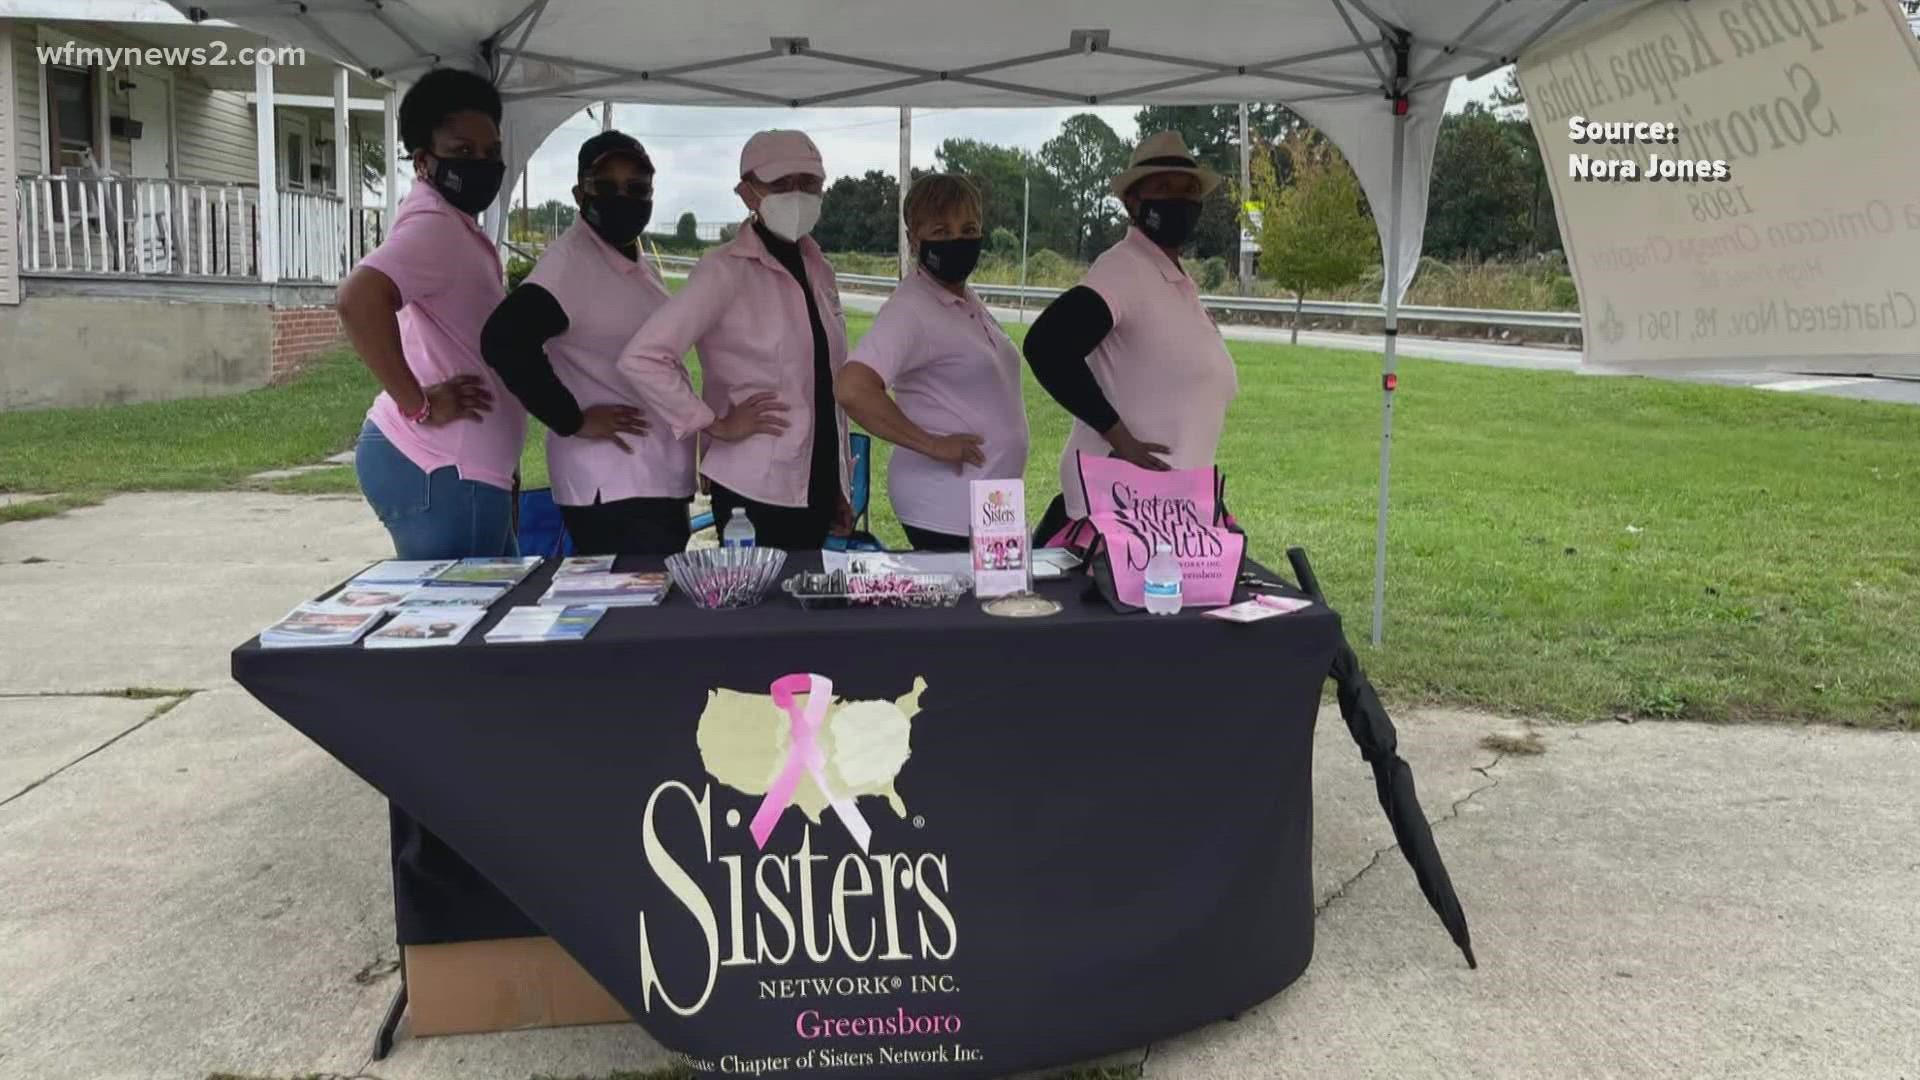 The Sister's Network in Greensboro teamed up with Cone Health to provide free mammograms to a community that often has little access to these life-saving screenings.